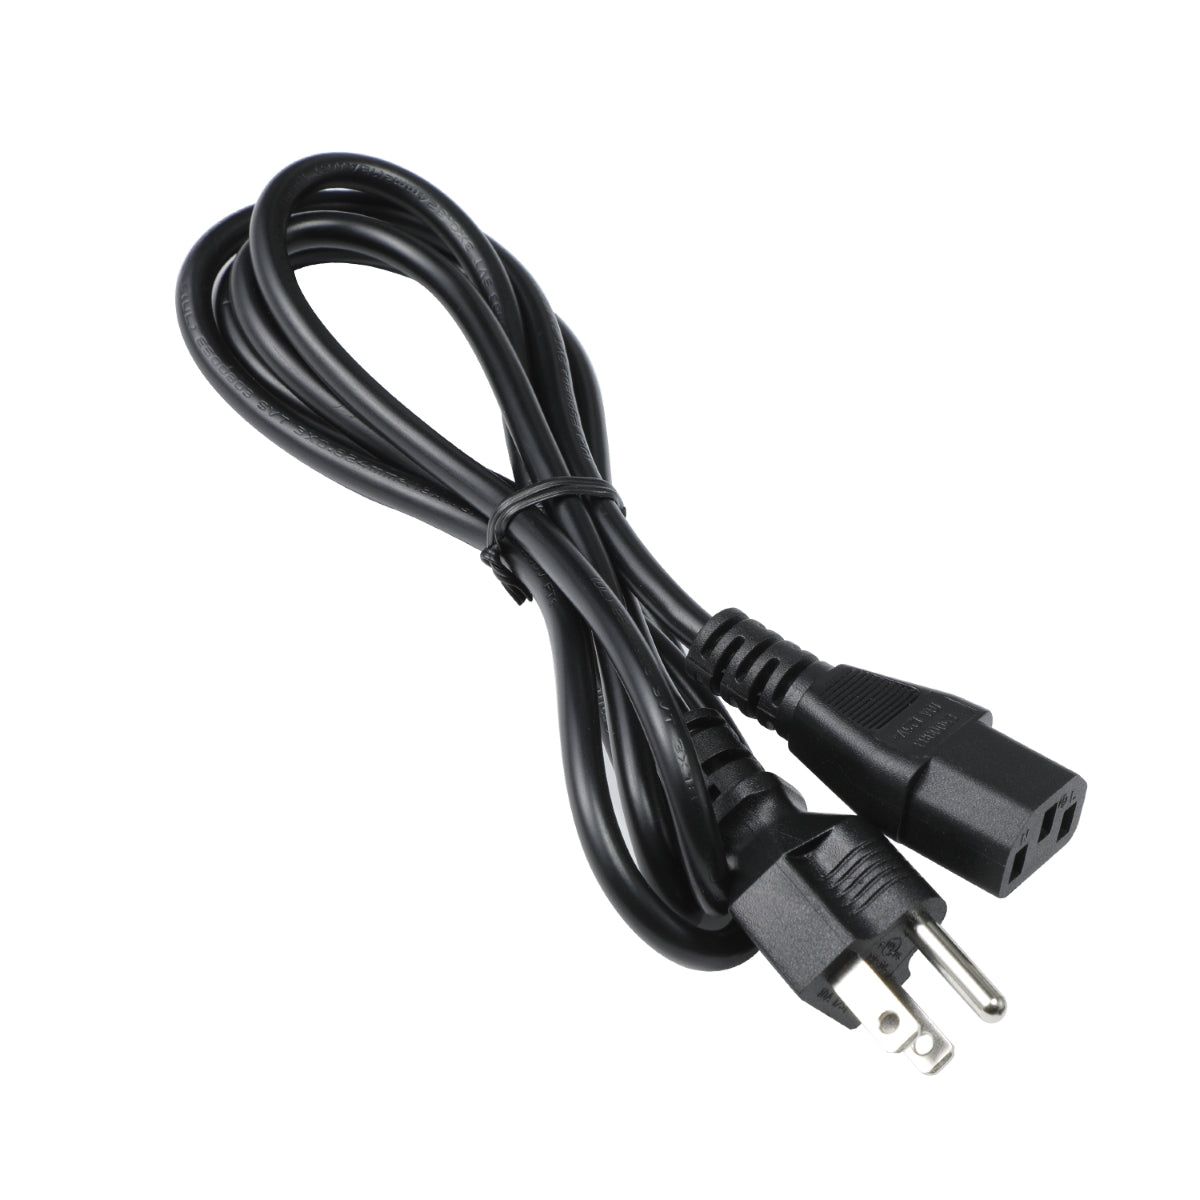 Power Cord for Acer VG270U Monitor.